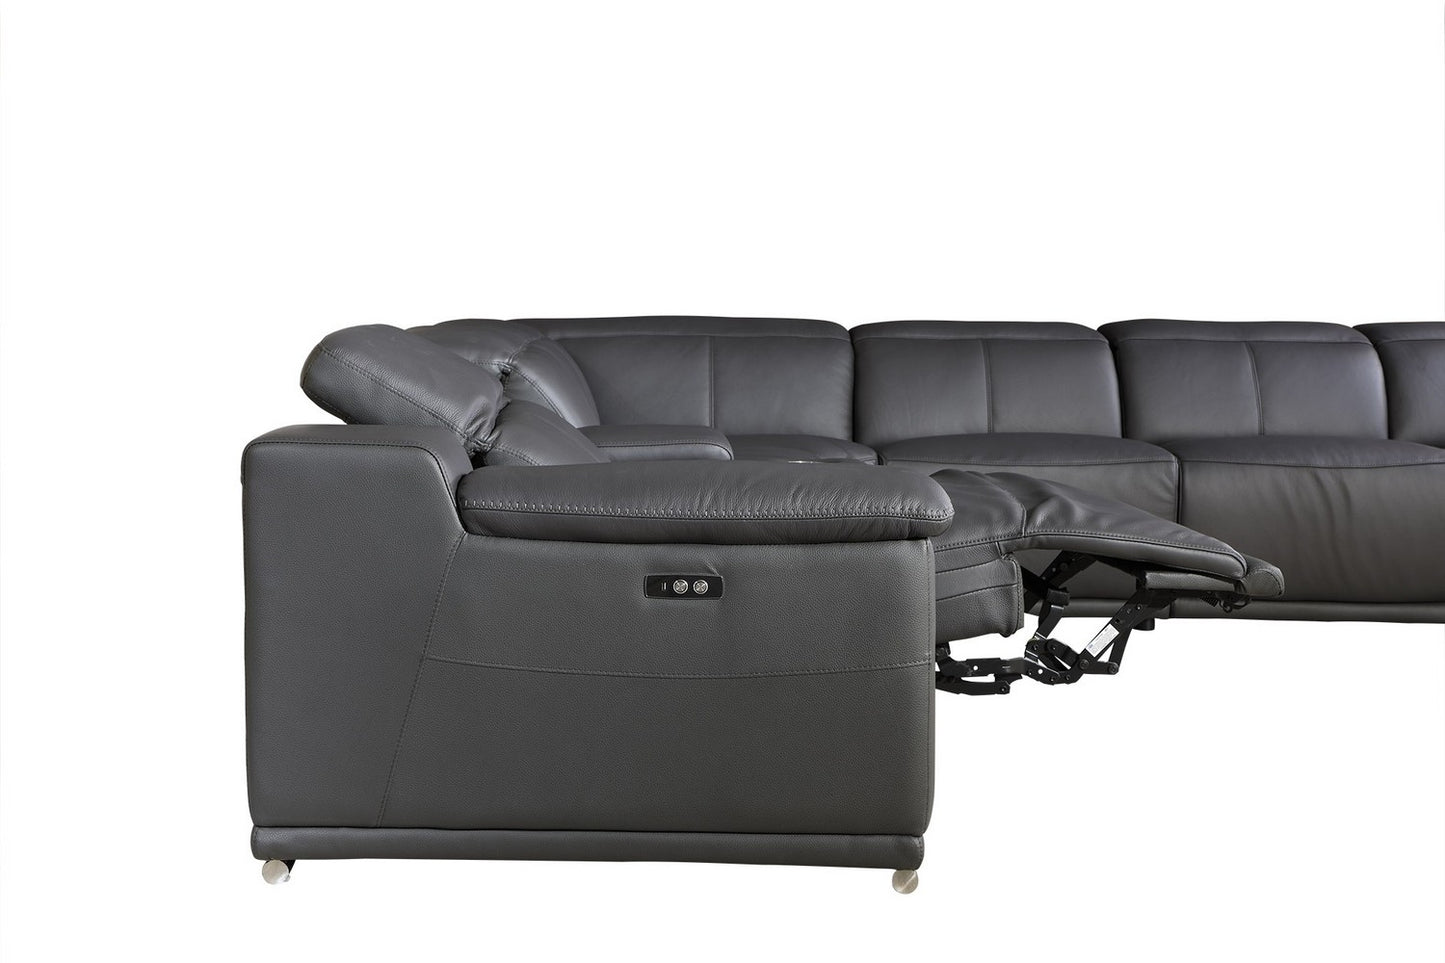 Gray Italian Leather Power Reclining U Shaped Six Piece Corner Sectional With Console